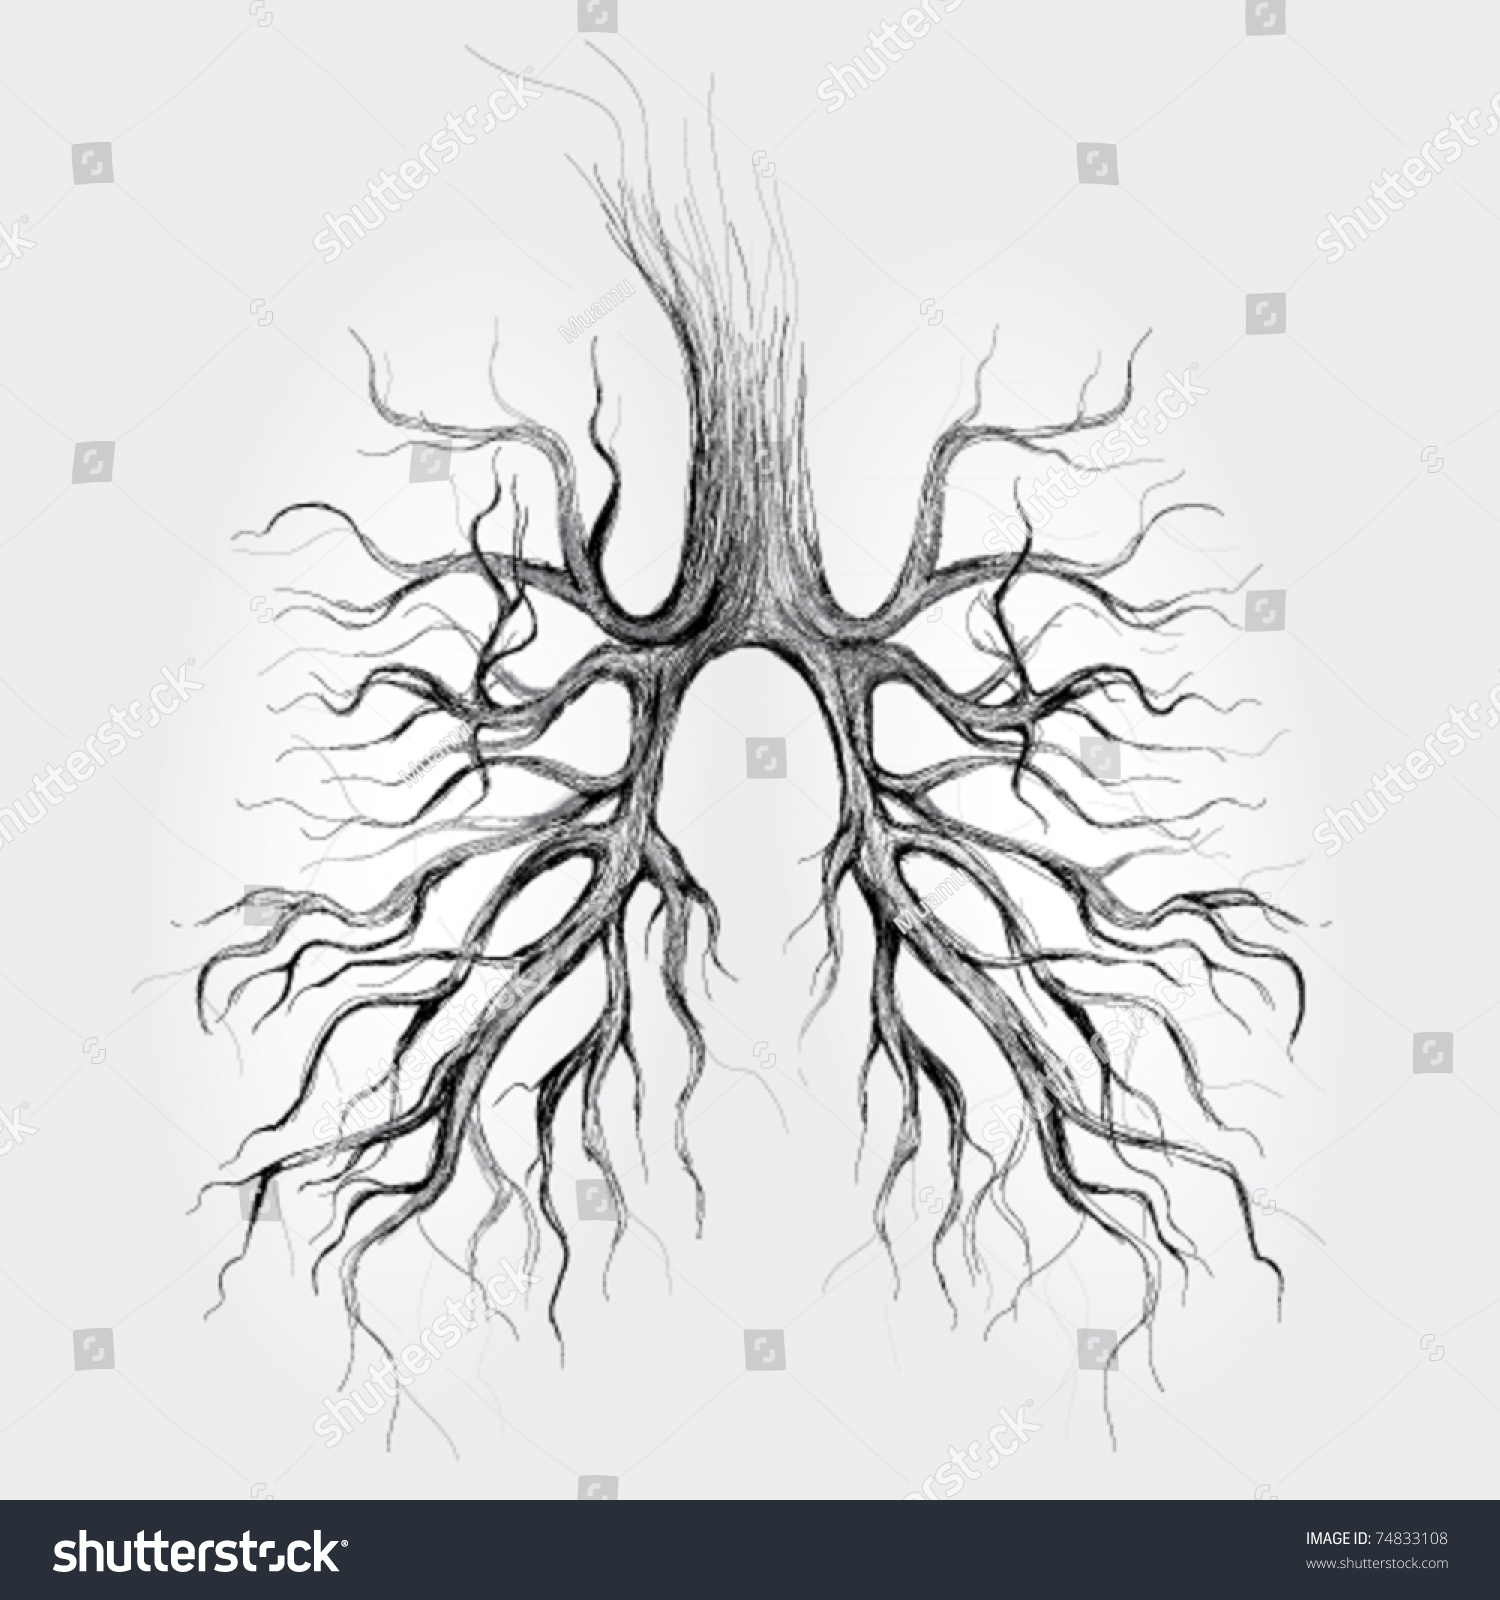 Tree Lungs Of The Earth / Realistic Sketch Stock Vector 74833108